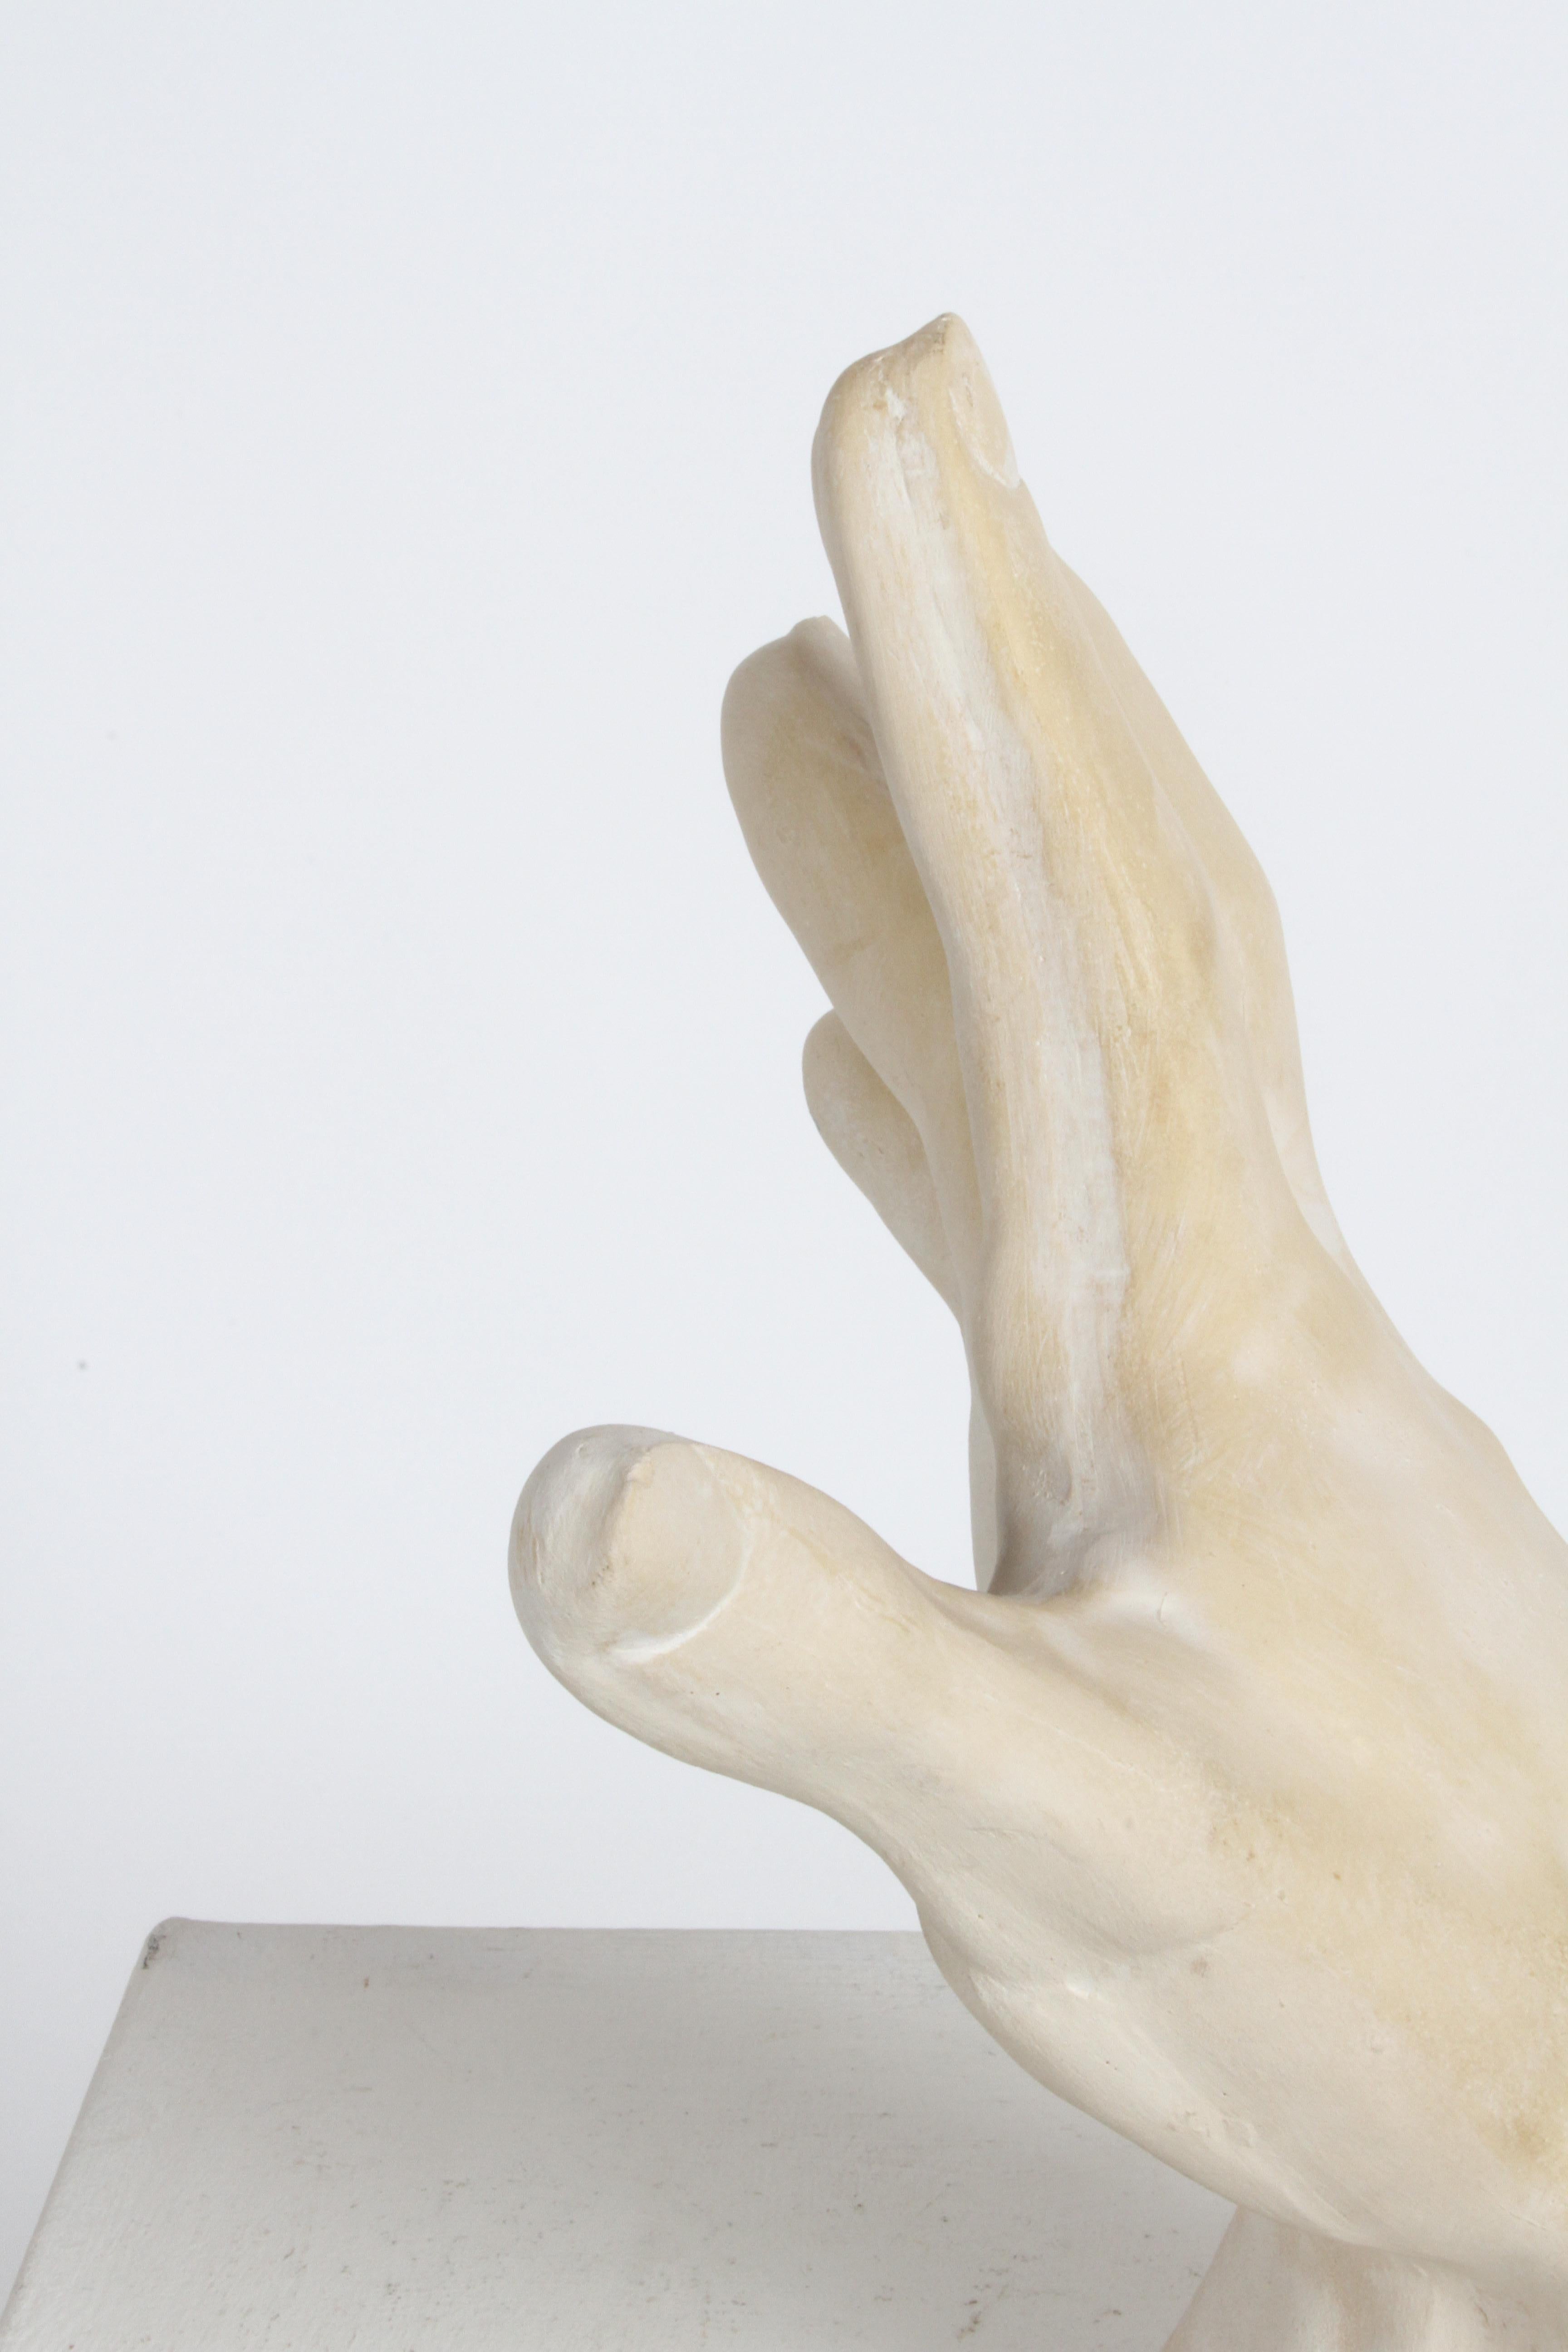 Large 1970s Plaster Artist Hand Study Table Sculpture, Style of John Dickinson For Sale 2